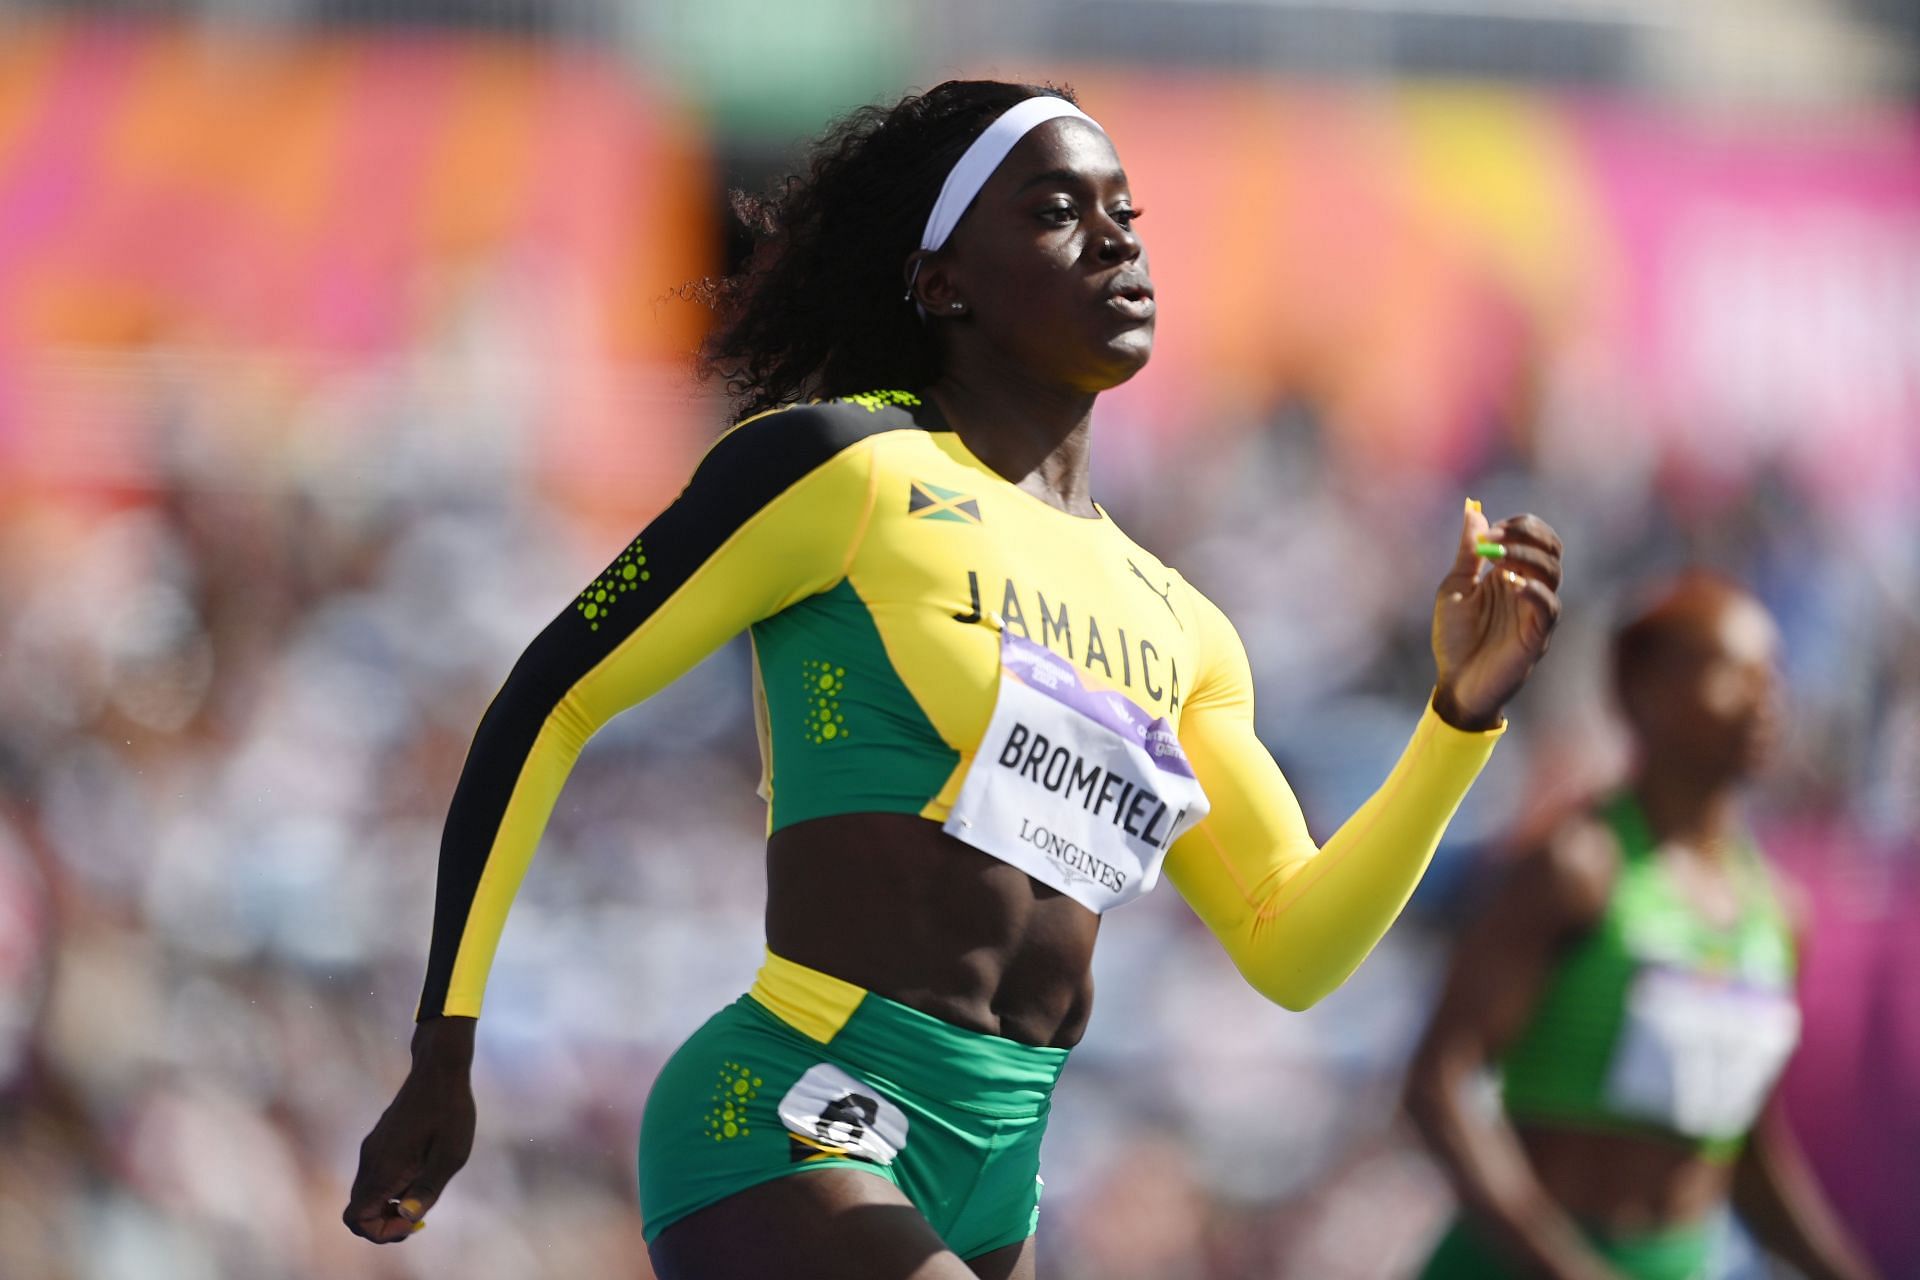 Junelle Bromfield at Commonwealth Games